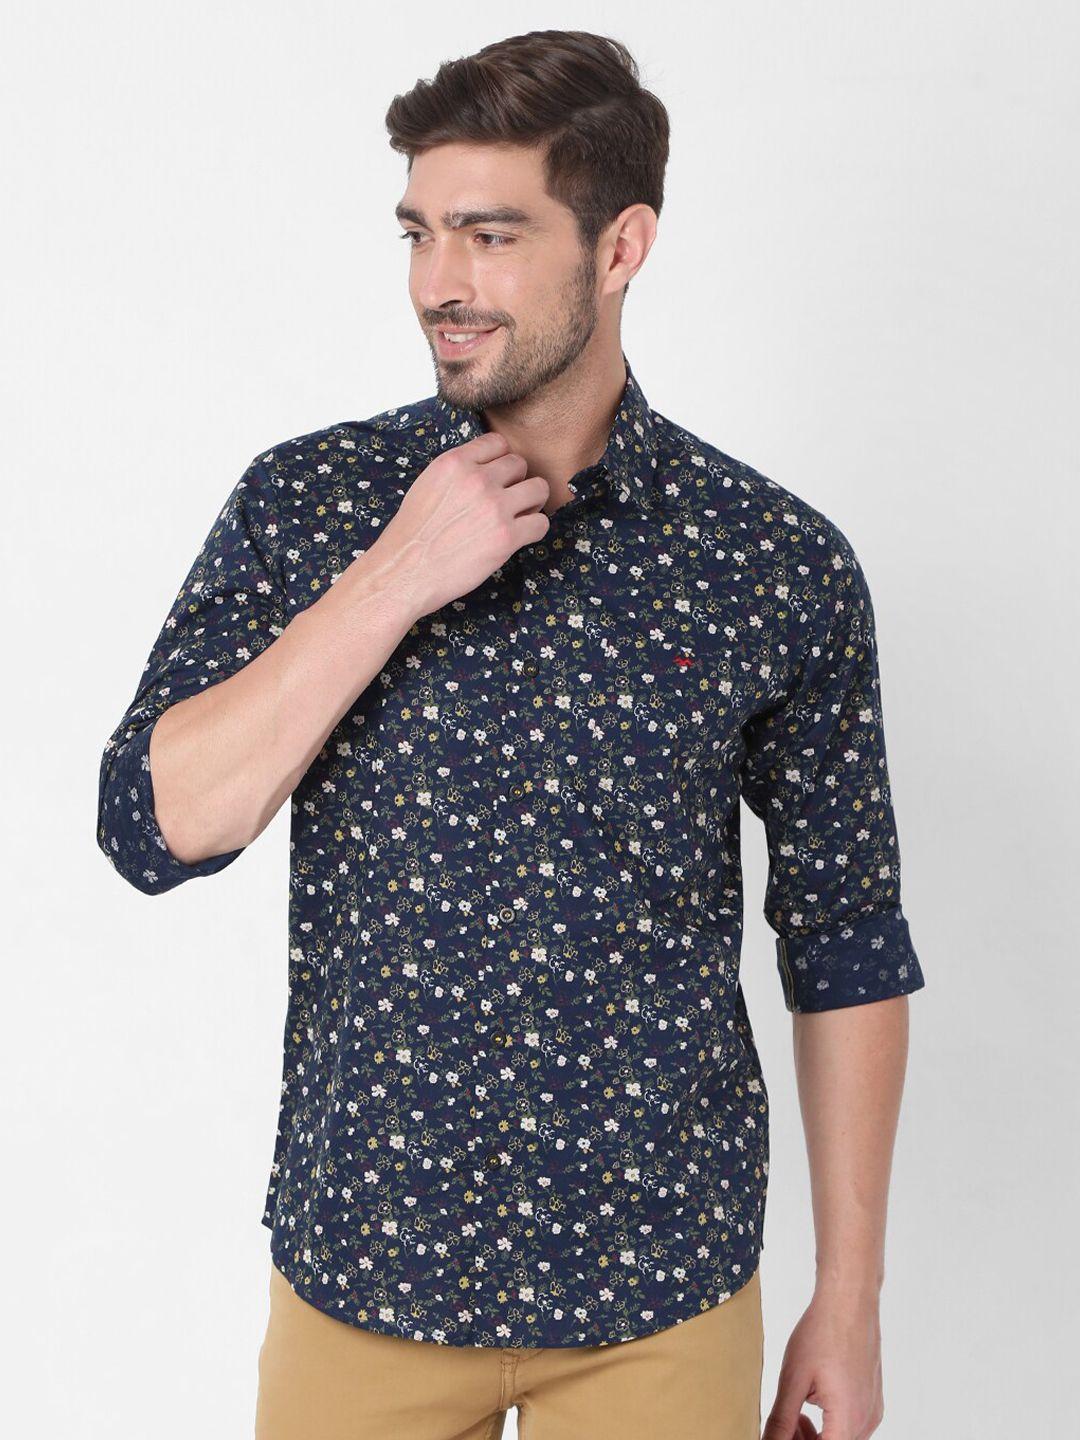 mufti-men-navy-blue-slim-fit-floral-printed-casual-shirt